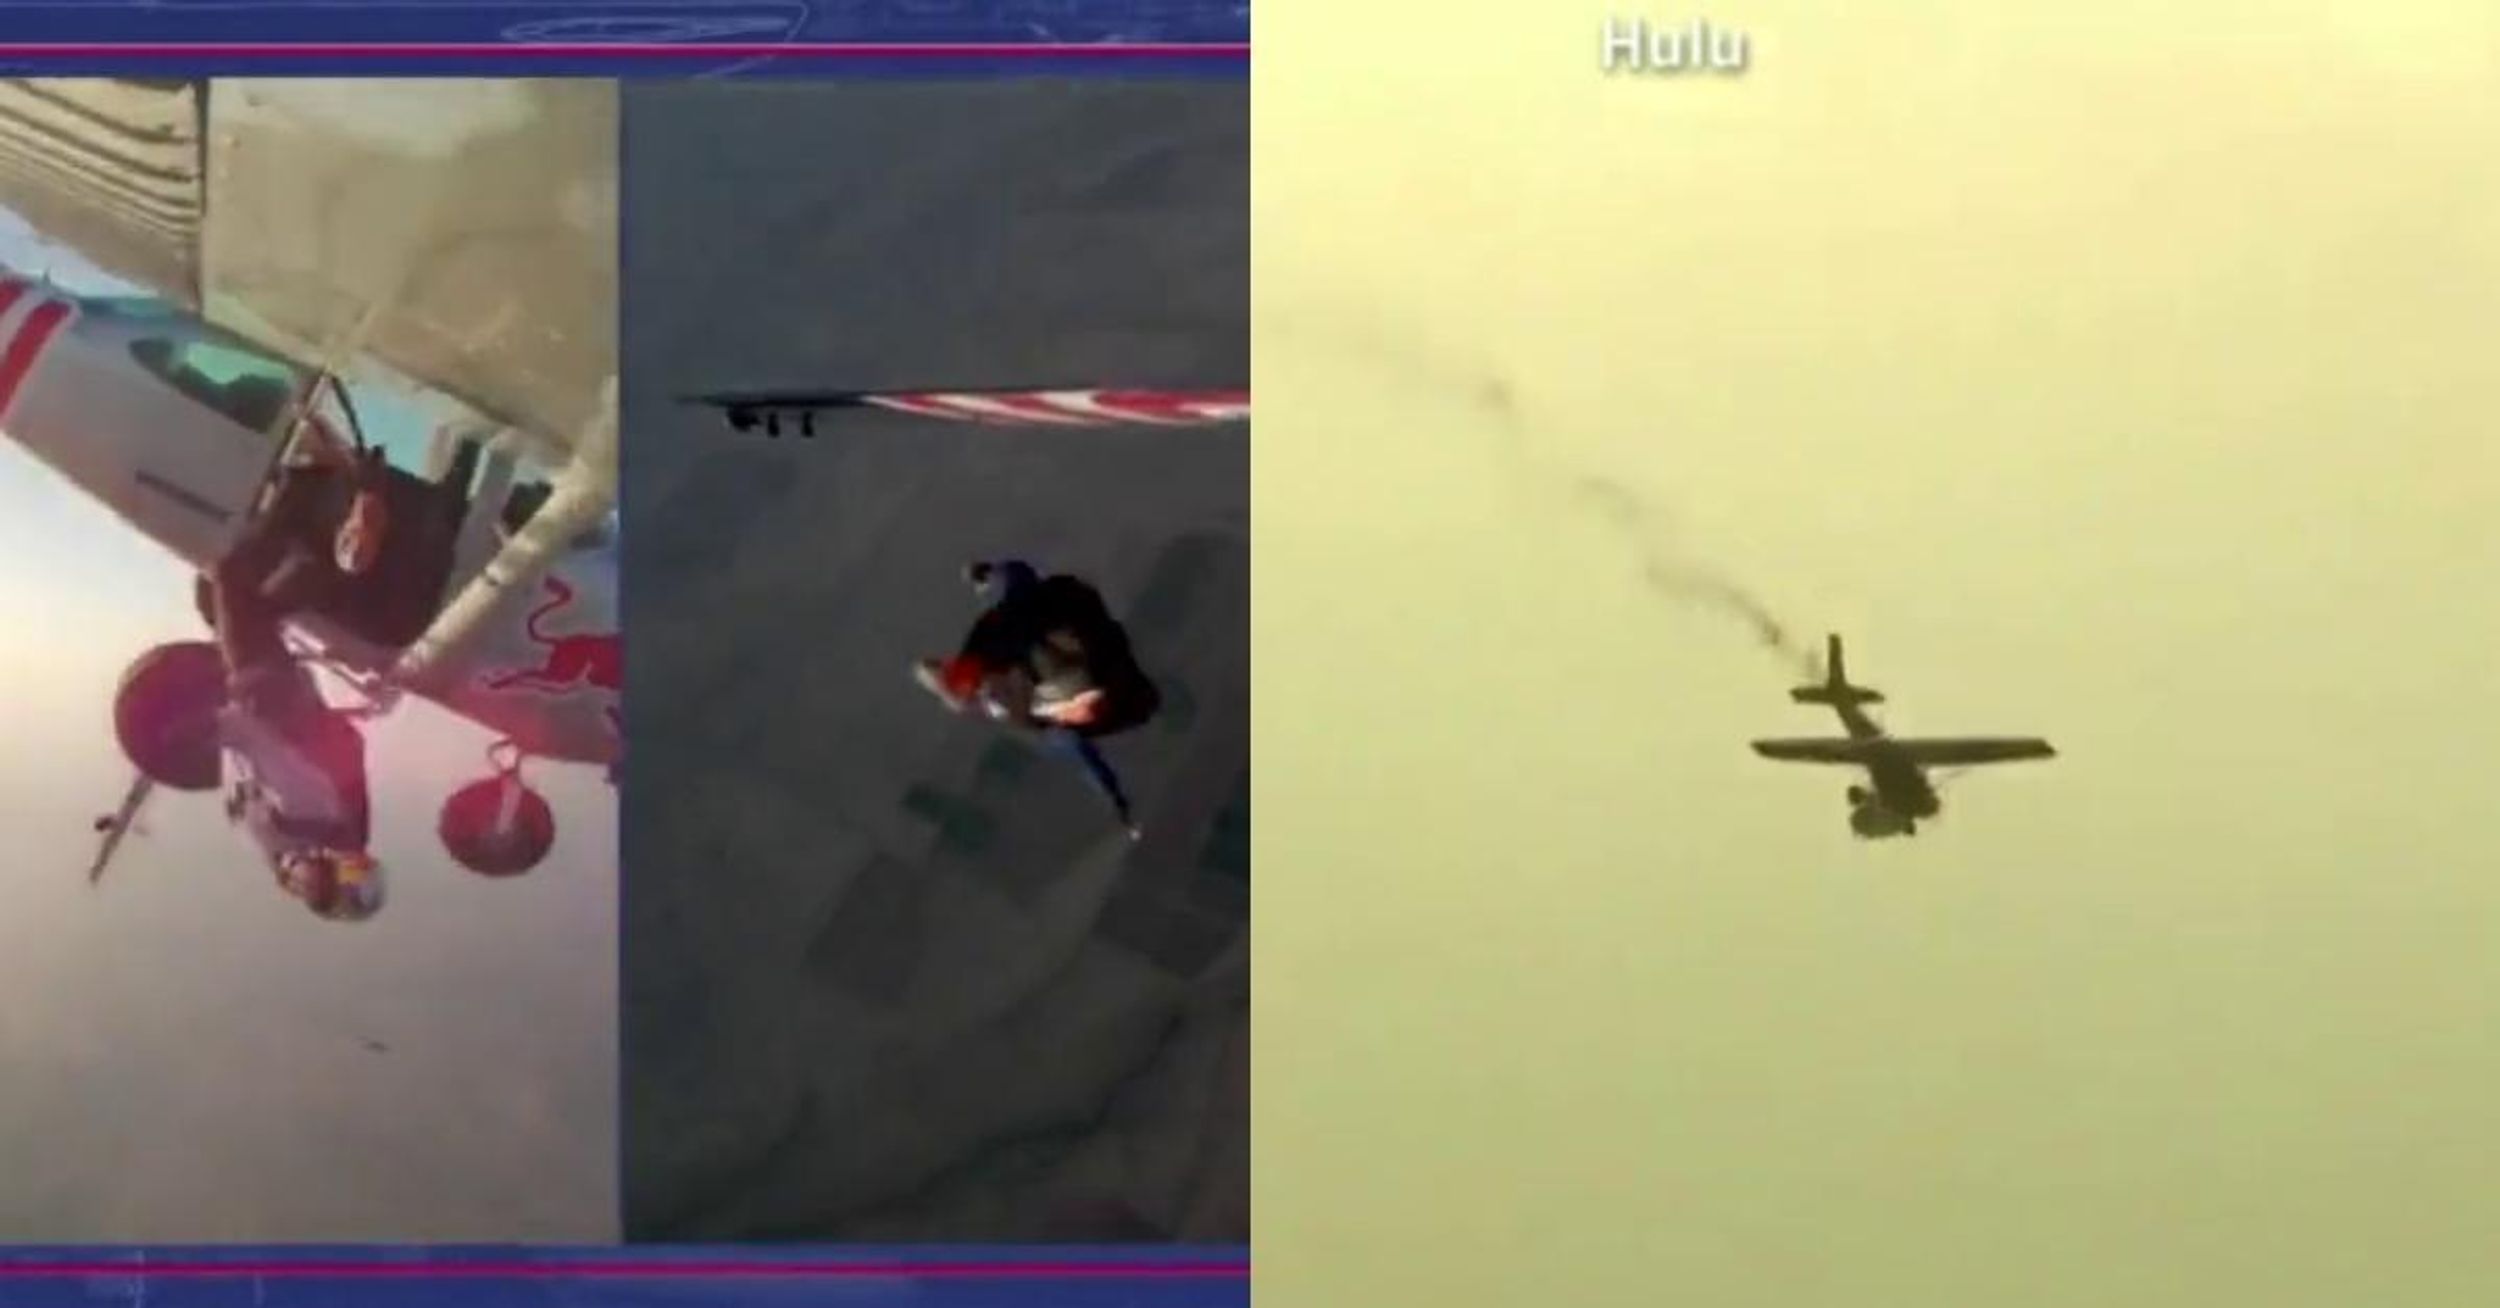 FAA Investigating After Red Bull Stunt Involving Pilots Switching Planes Midair Goes Horribly Awry